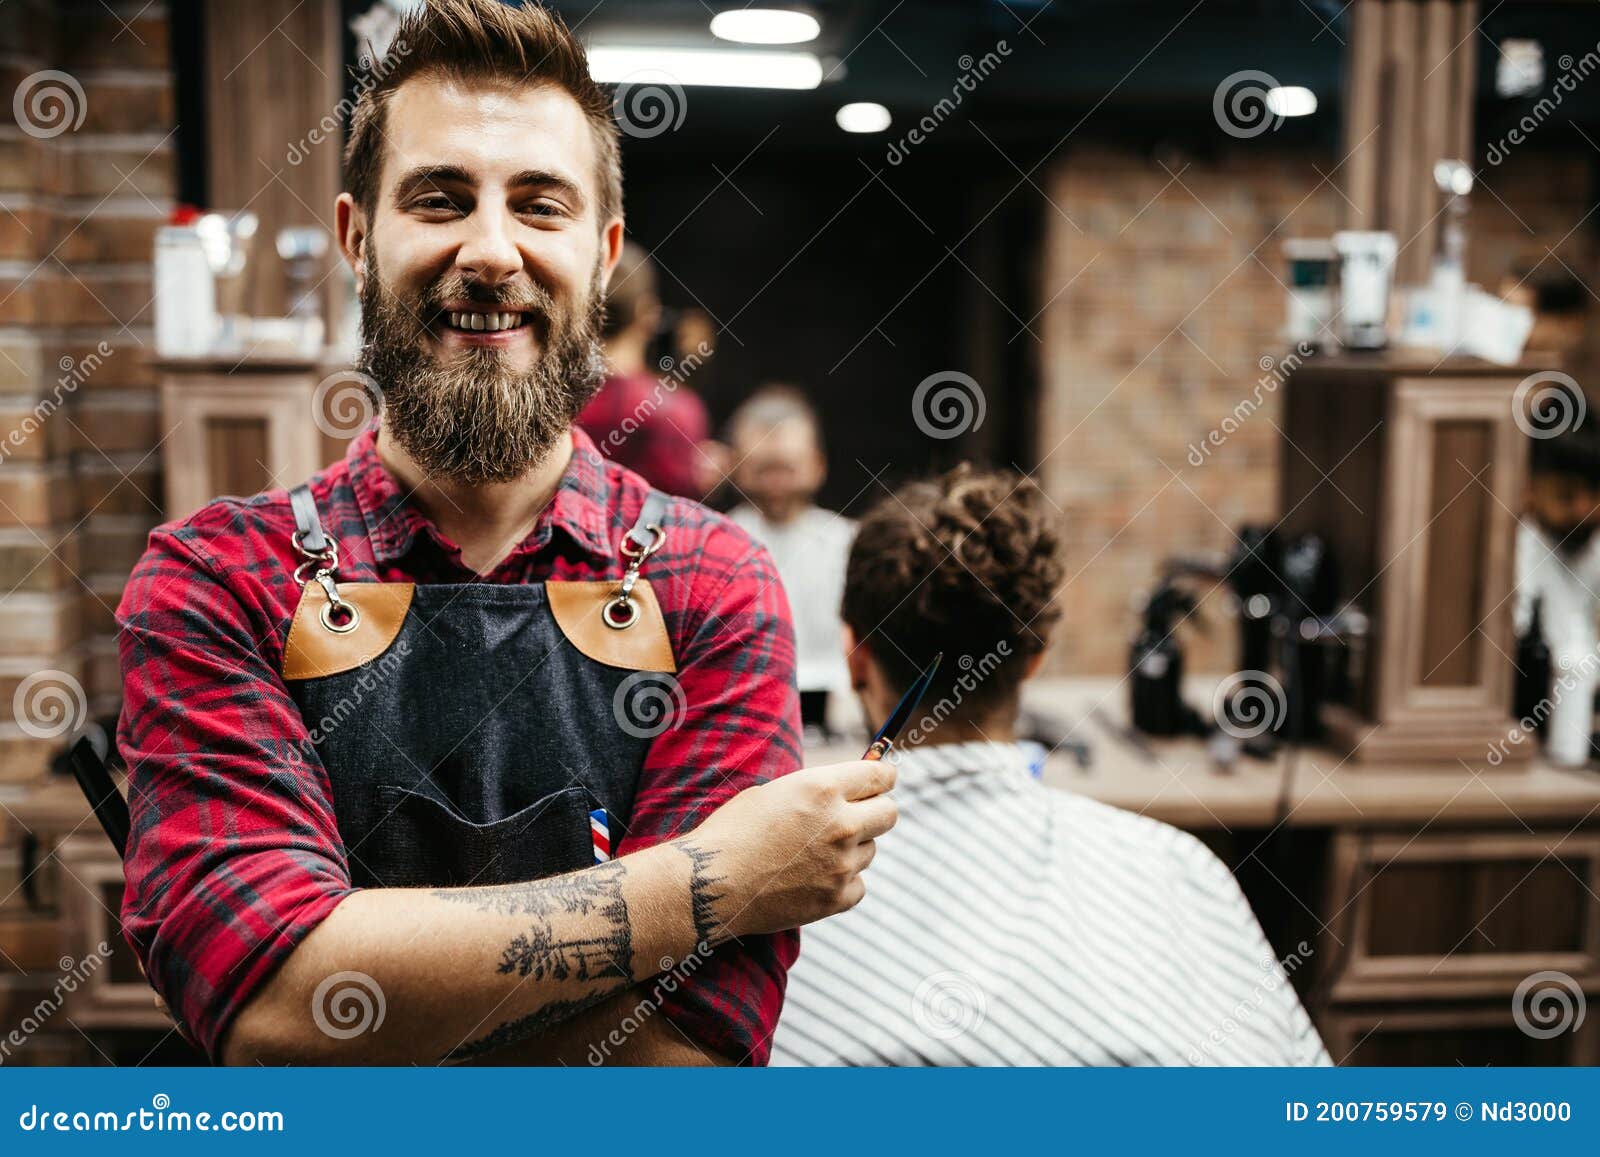 Portrait of Happy Young Barber with Client at Barbershop and Smiling ...